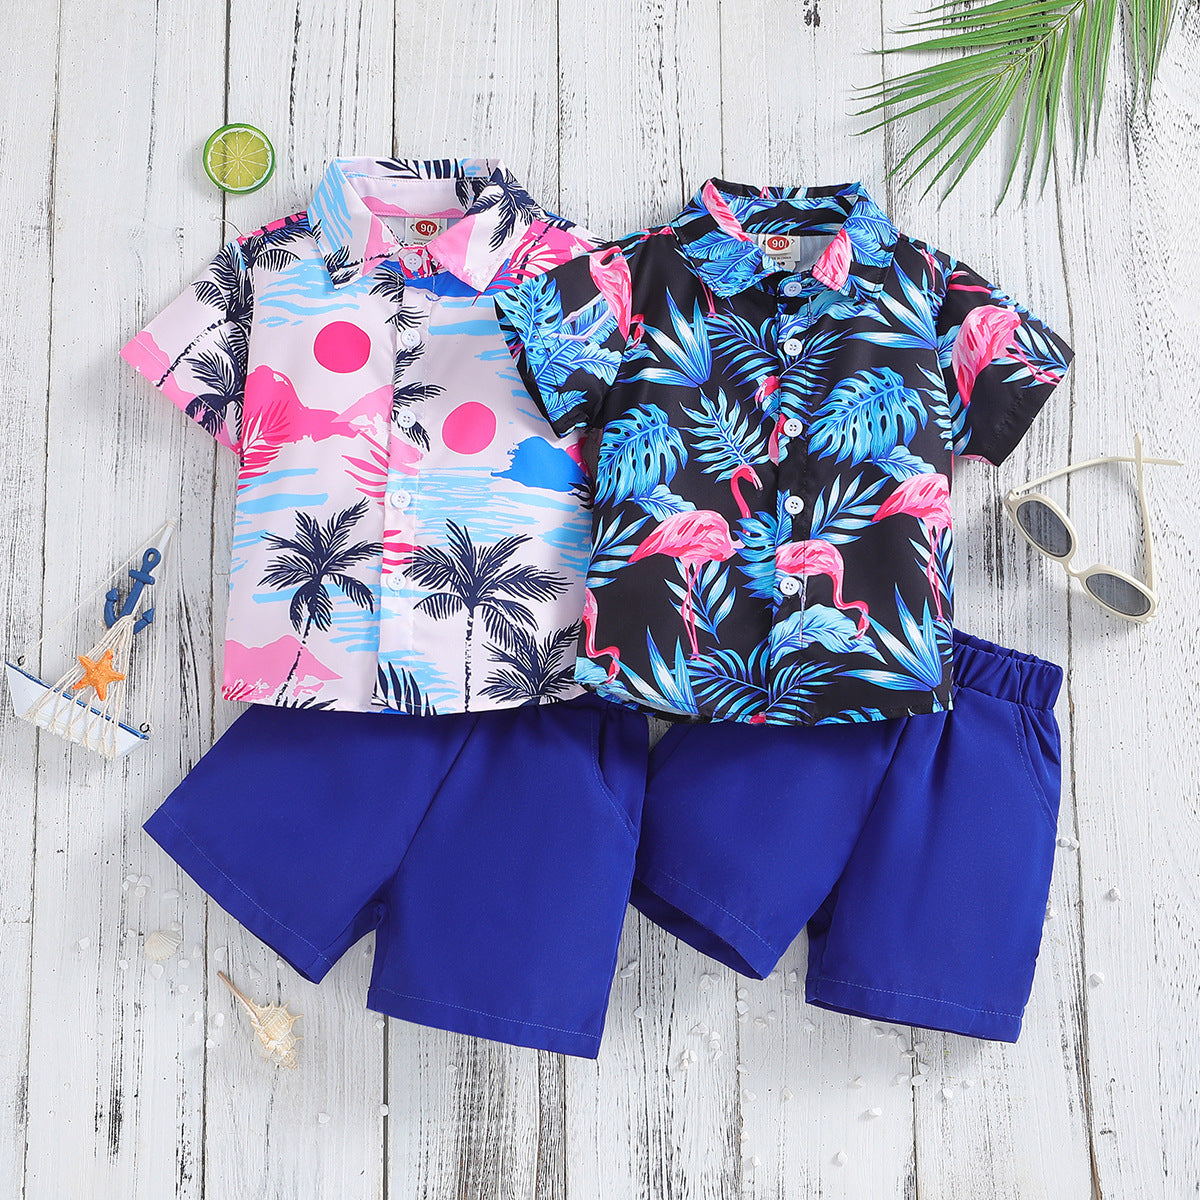 Two-piece summer outfit for boys featuring a short-sleeved shirt with a colorful summer print and coordinating shorts. 